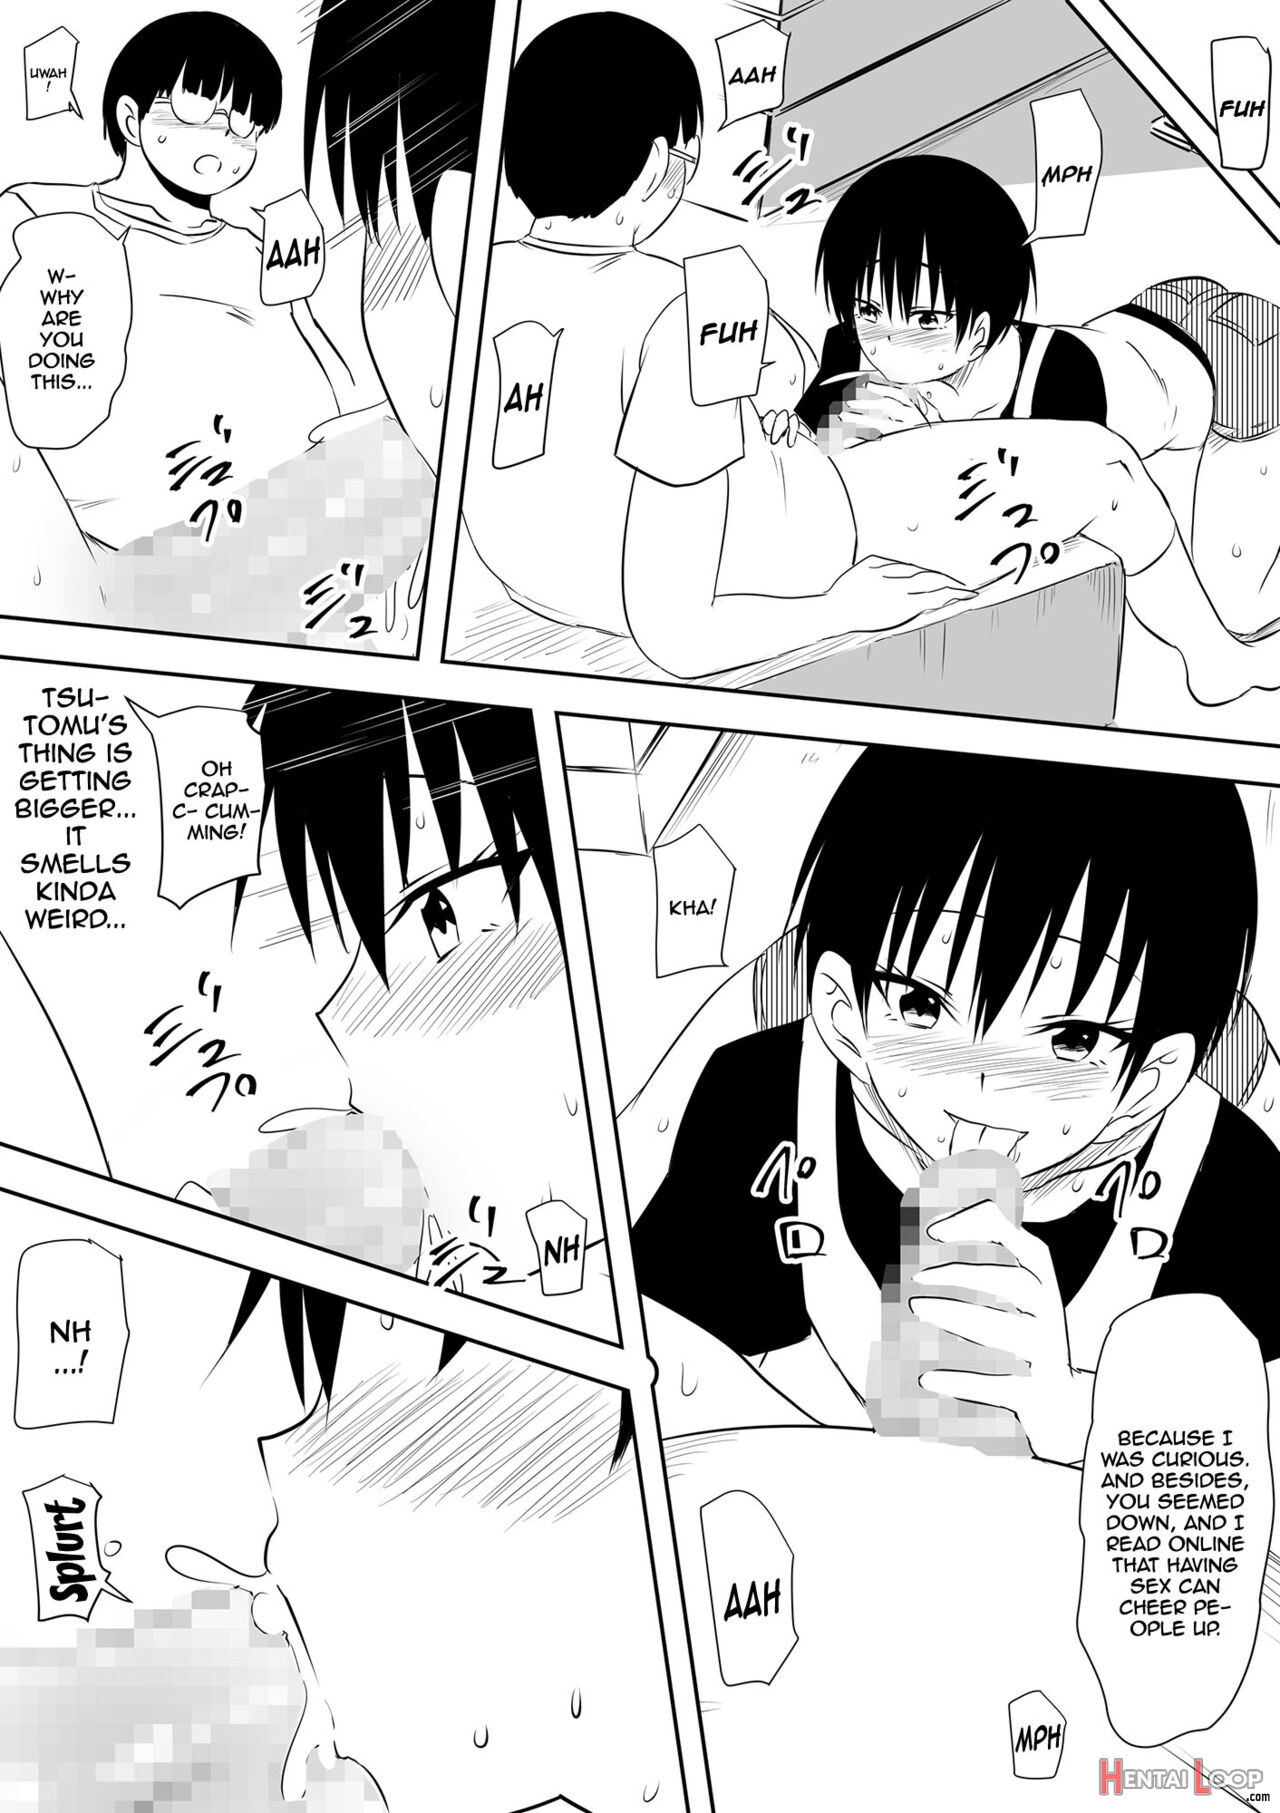 Development Records Of An Asocial Otaku And A Brown Tomboy Going At It Over And Over page 6